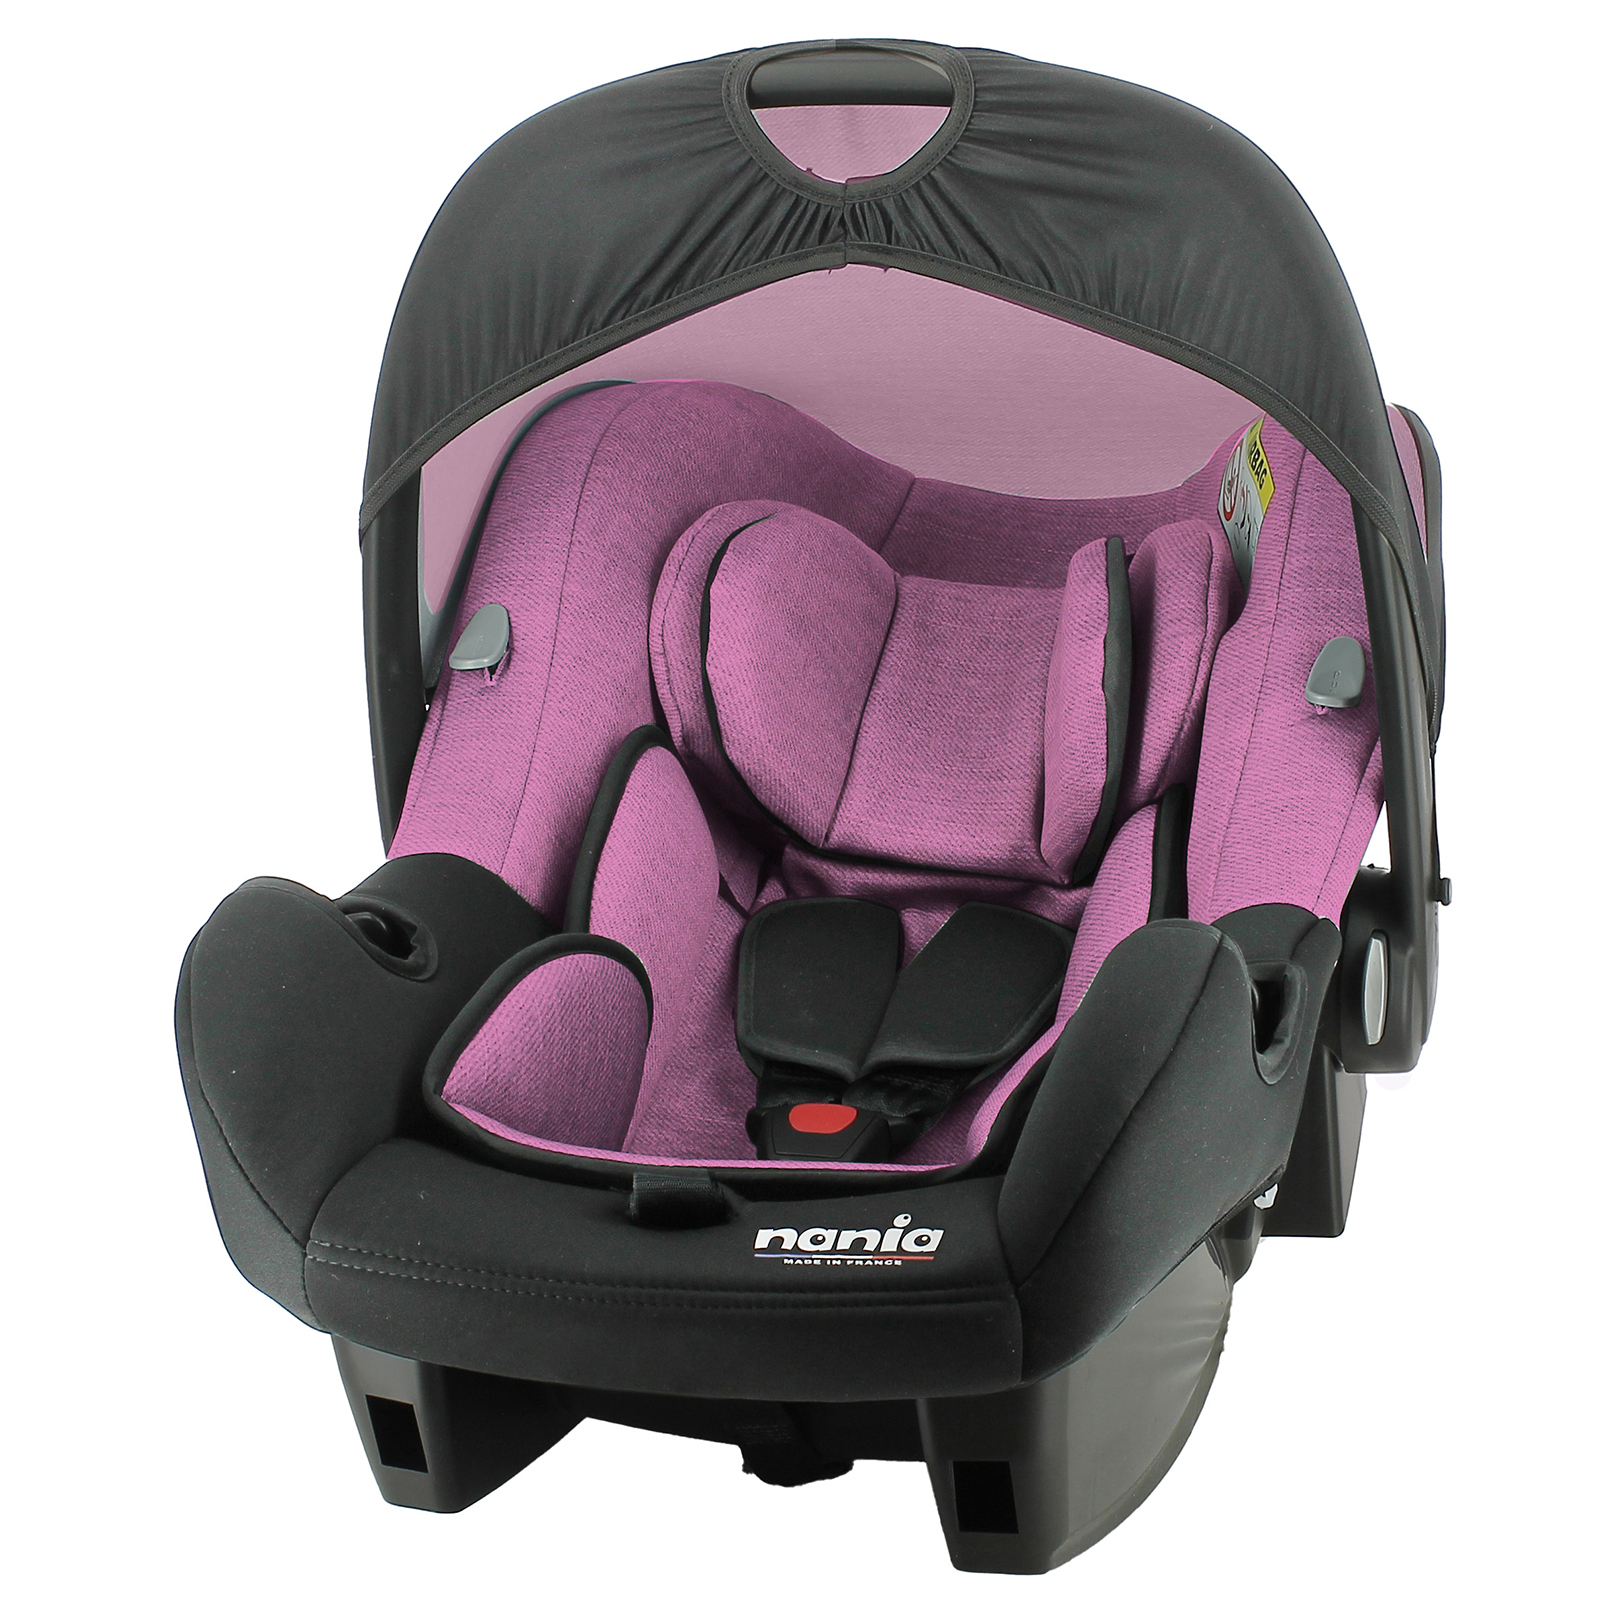 Nania Beone Denim R129 Group 0+ Infant Carrier Car Seat - Pink (0-15 Months)